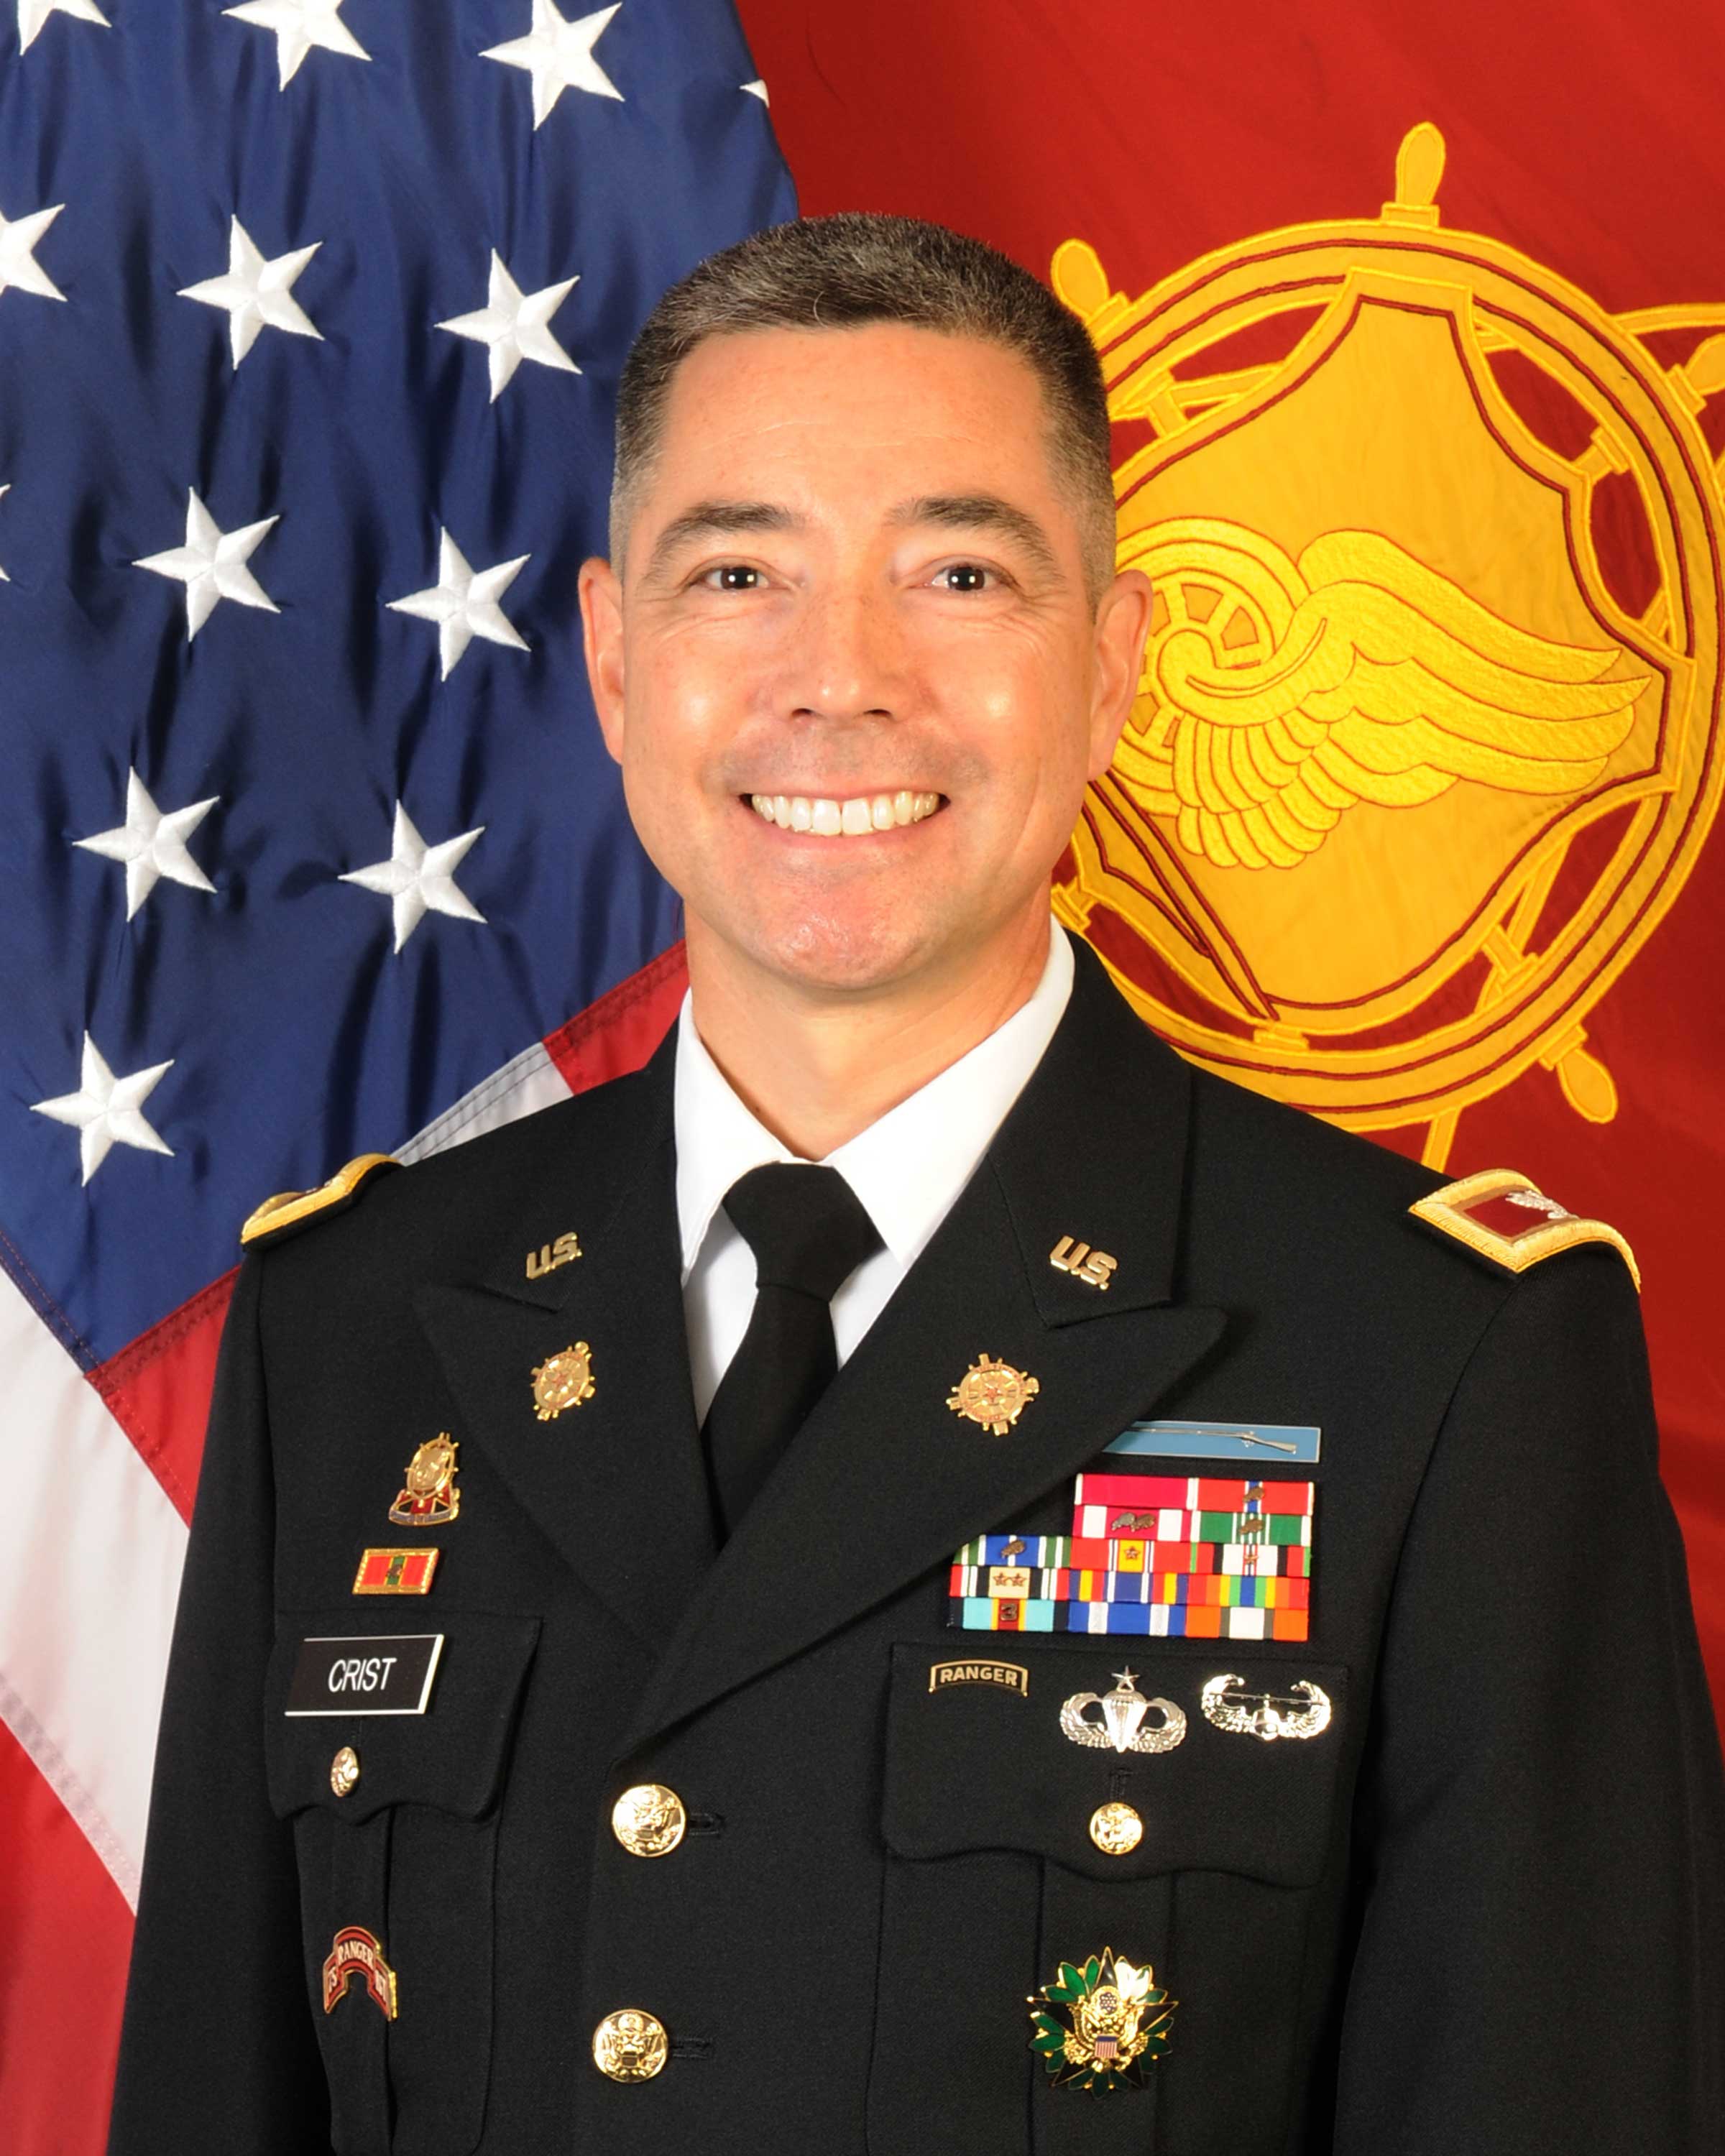 Image of the Cheif of the Transportation Corps.